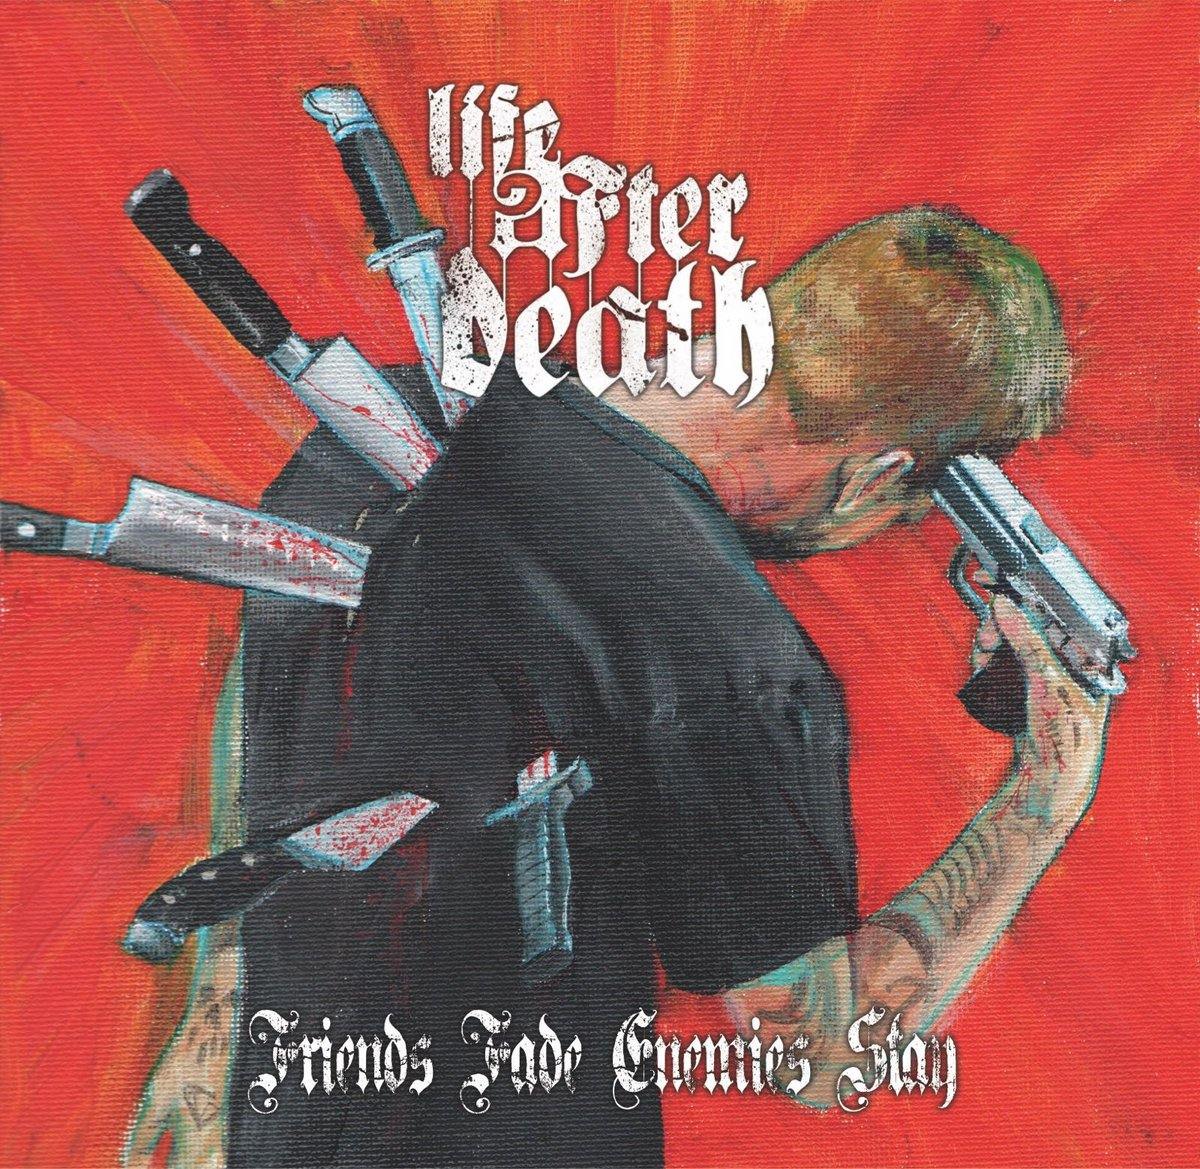 Buy – Life After Death "Friends Fade Enemies Stay" CD – Band & Music Merch – Cold Cuts Merch